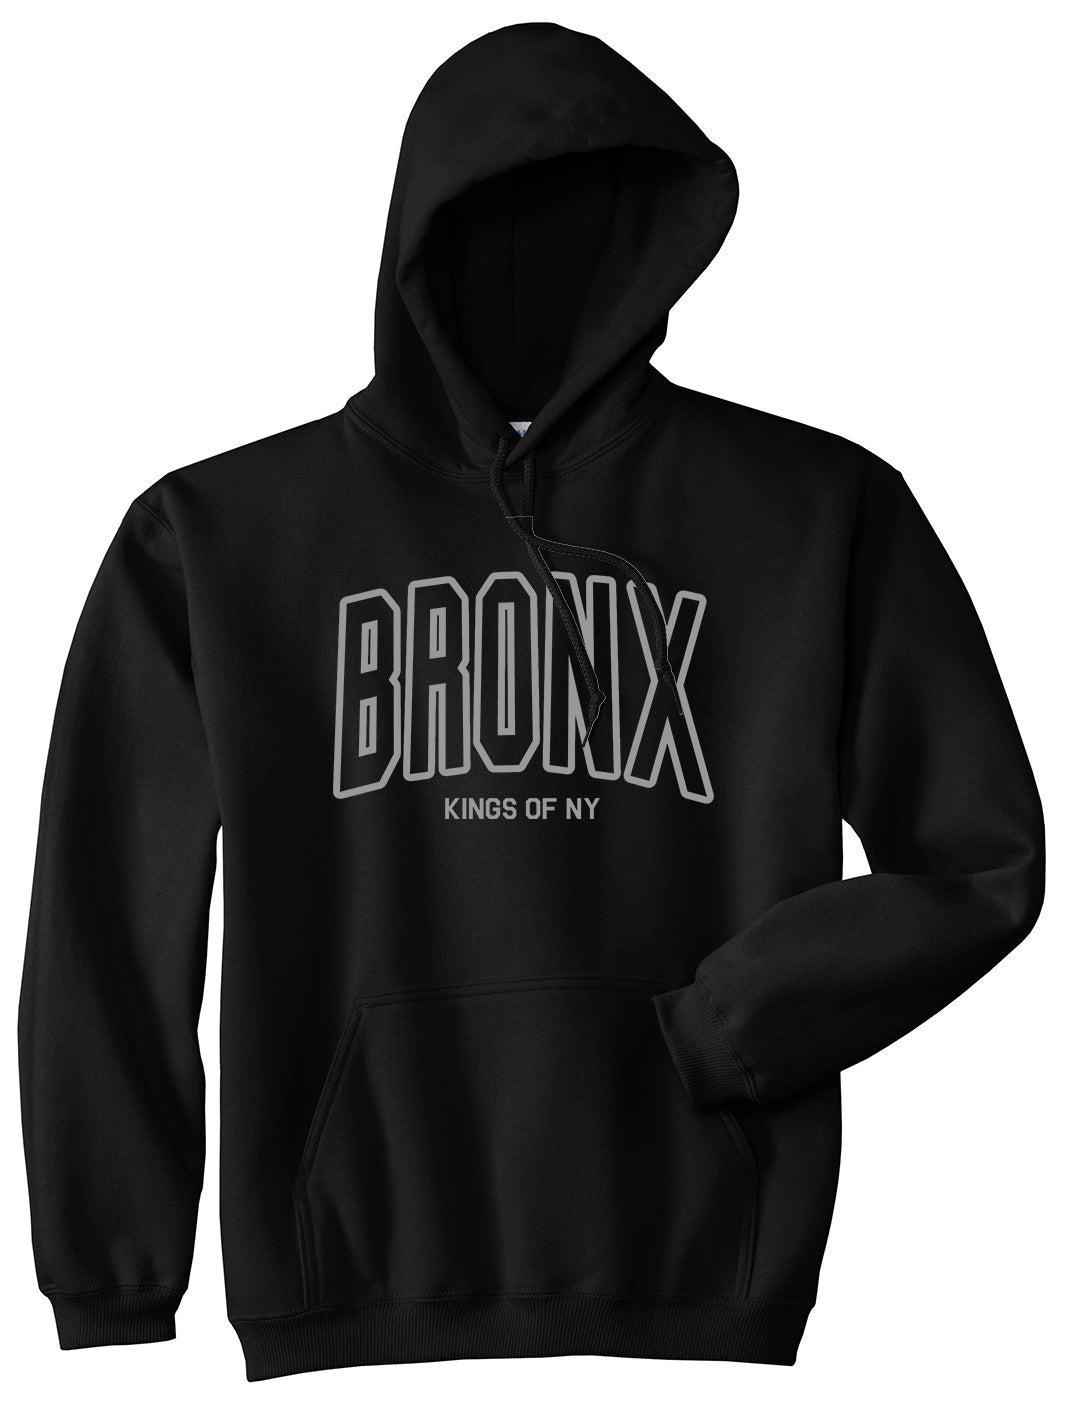 BRONX College Outline Mens Pullover Hoodie Black by Kings Of NY